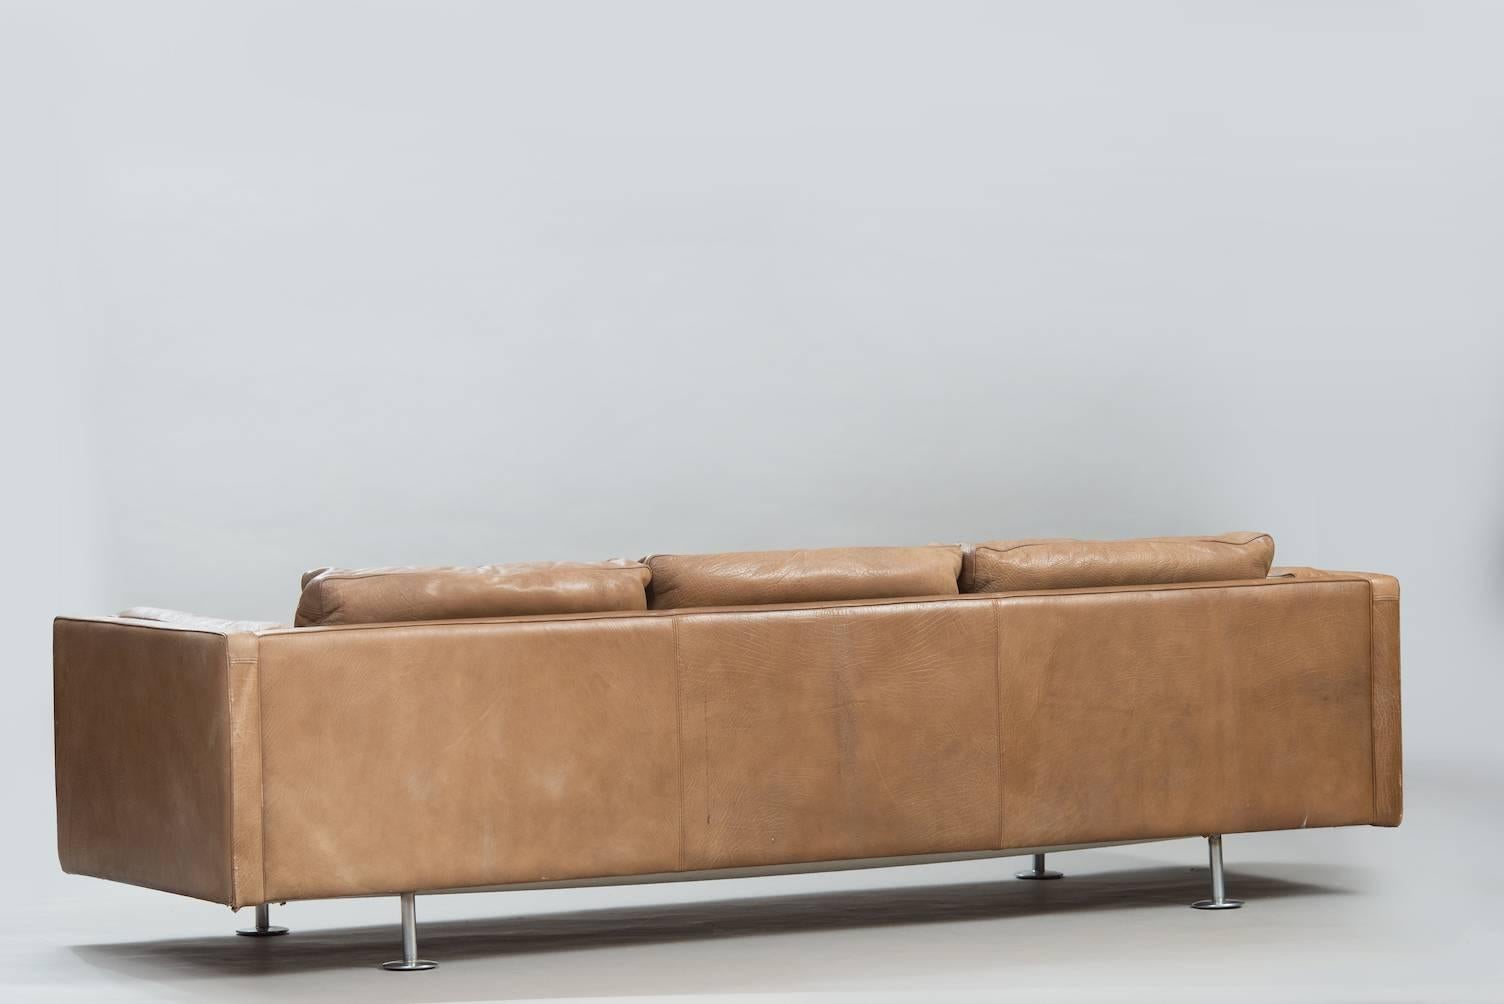 Three-seat sofa, upholstered in brown leather, steel legs.
Original condition, needs new upholstery, that we can make in leather or fabric in any color.